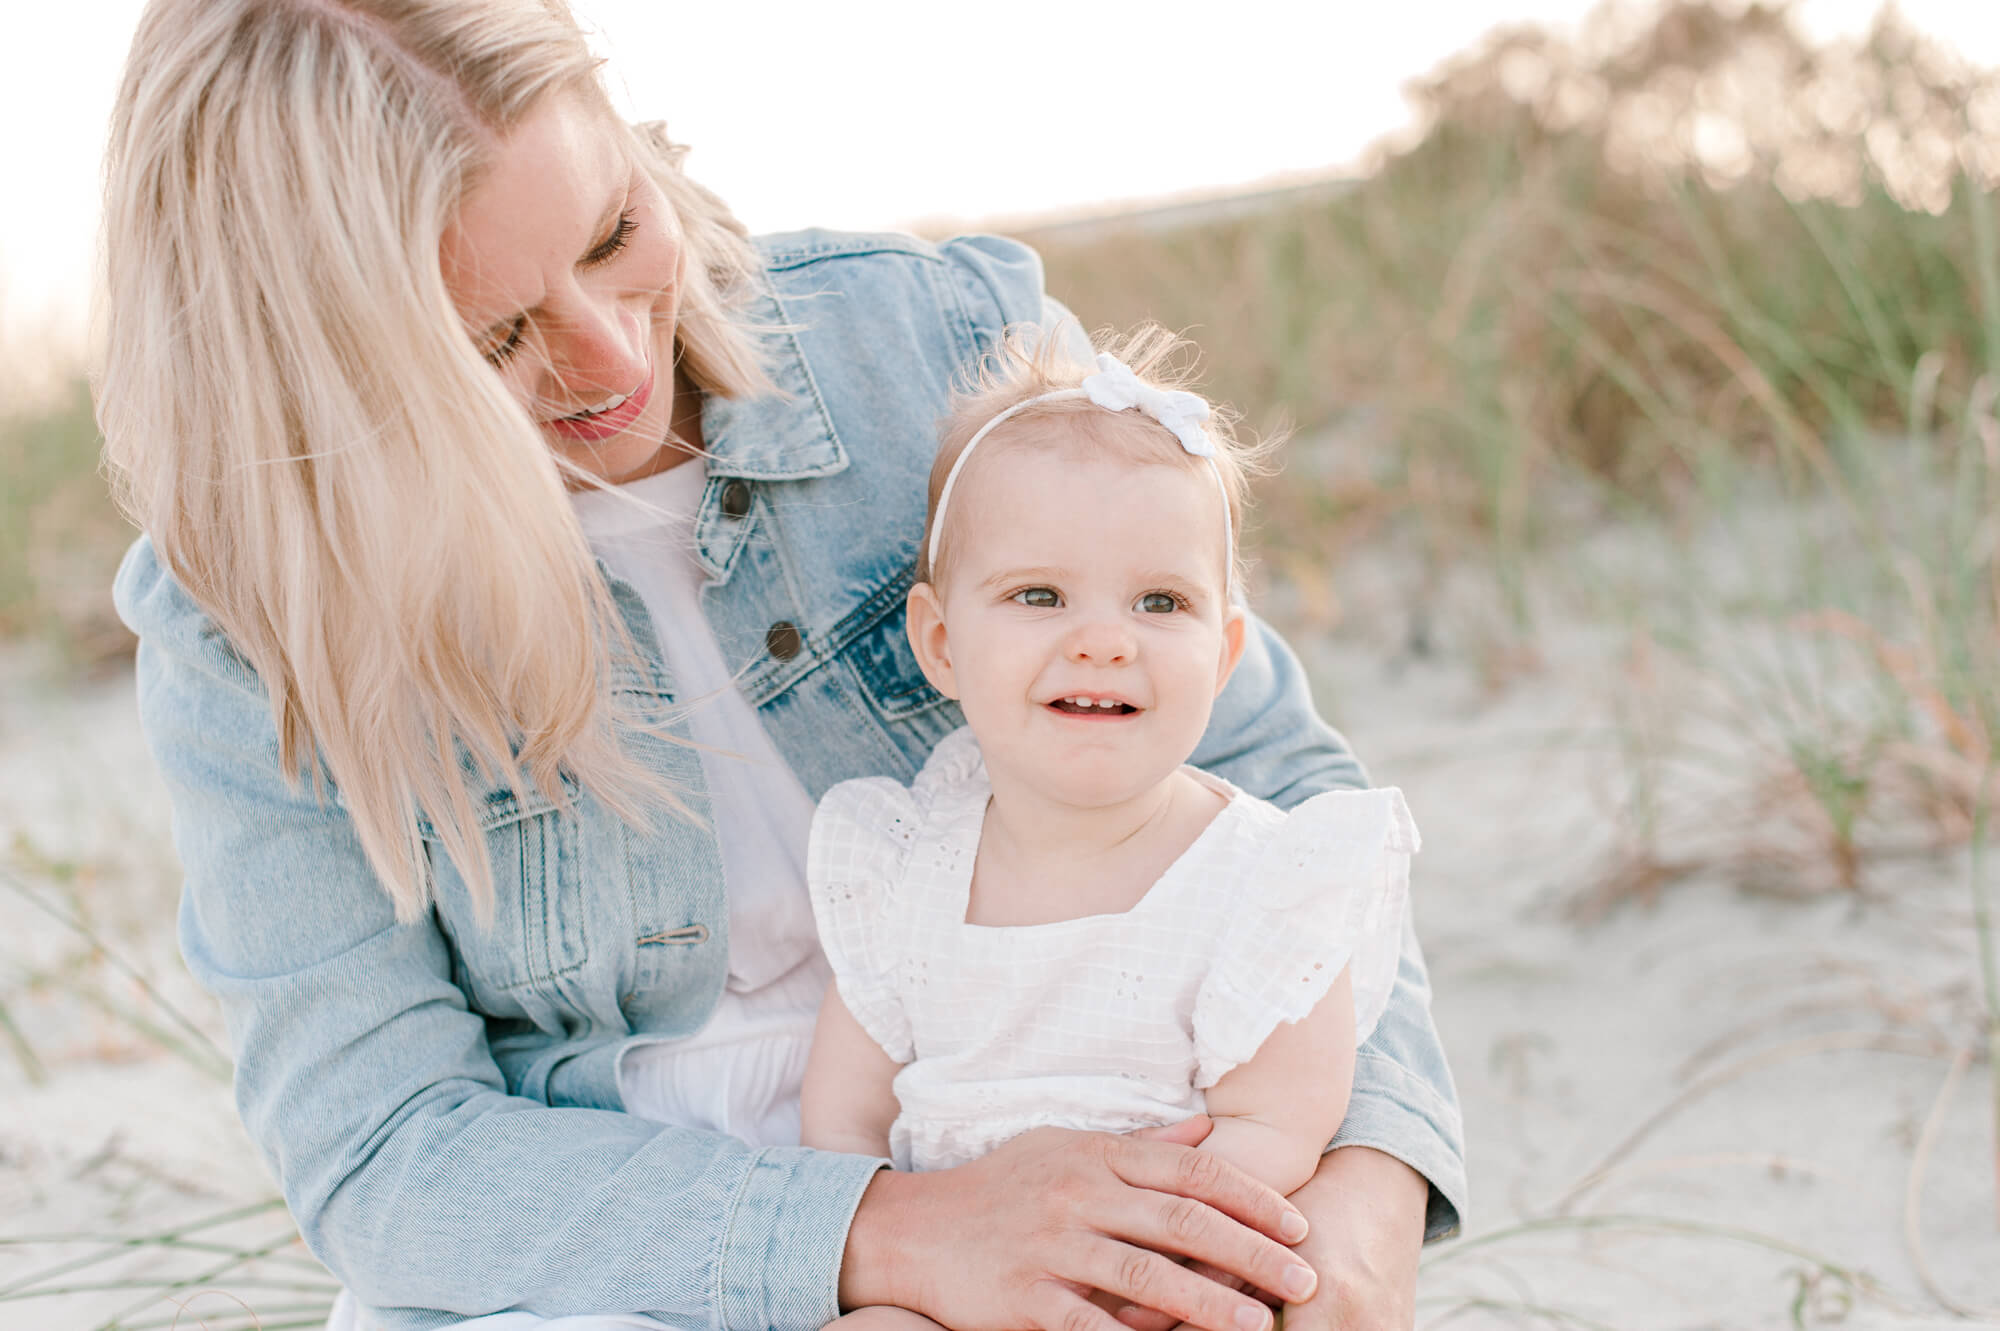 Mom admiring her beautiful daughter on the beach during a family session. Viera Pediatric Dentistry would be a perfect fit for her children.